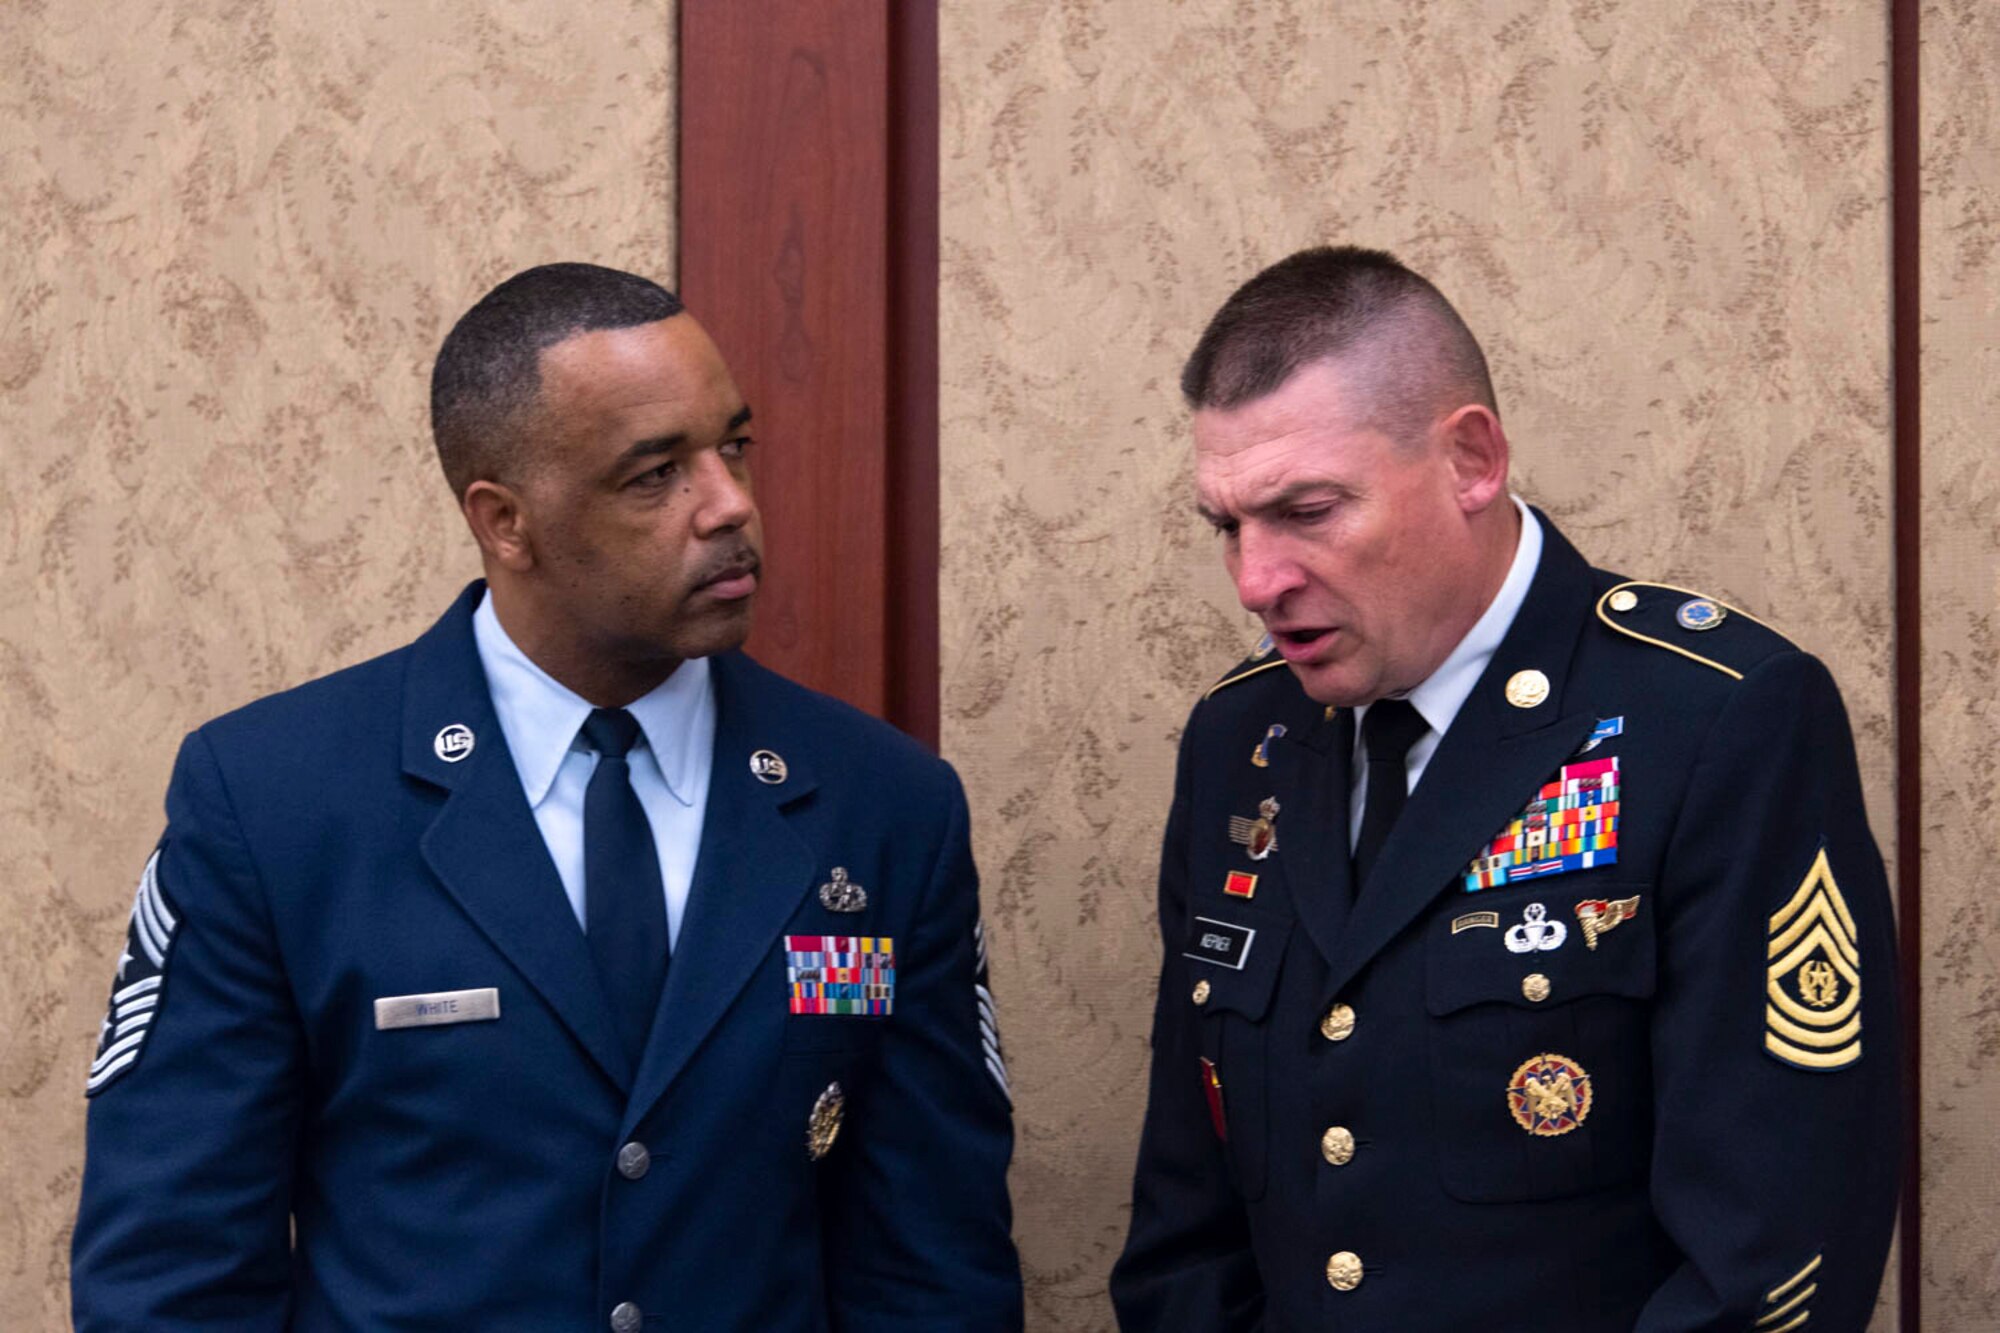 Chief Master Sgt Timothy White Jr., Senior Enlisted Advisor to the Chief of the Air Force Reserve, Pentagon, Washington D.C. and Command Chief Master Sergeant of Air Force Reserve Command, Robins Air Force Base, Georgia speaks with Command Sgt Maj Christopher Kepner, Senior Enlisted Advisor to the Chief of the National Guard Bureau before breakfast at the House National Guard and Reserve Component Caucus Breakfast at the U.S Capitol, Washington D.C., April 30, 2019. (U.S. Air Force photo by SrA Andreaa Phillips)